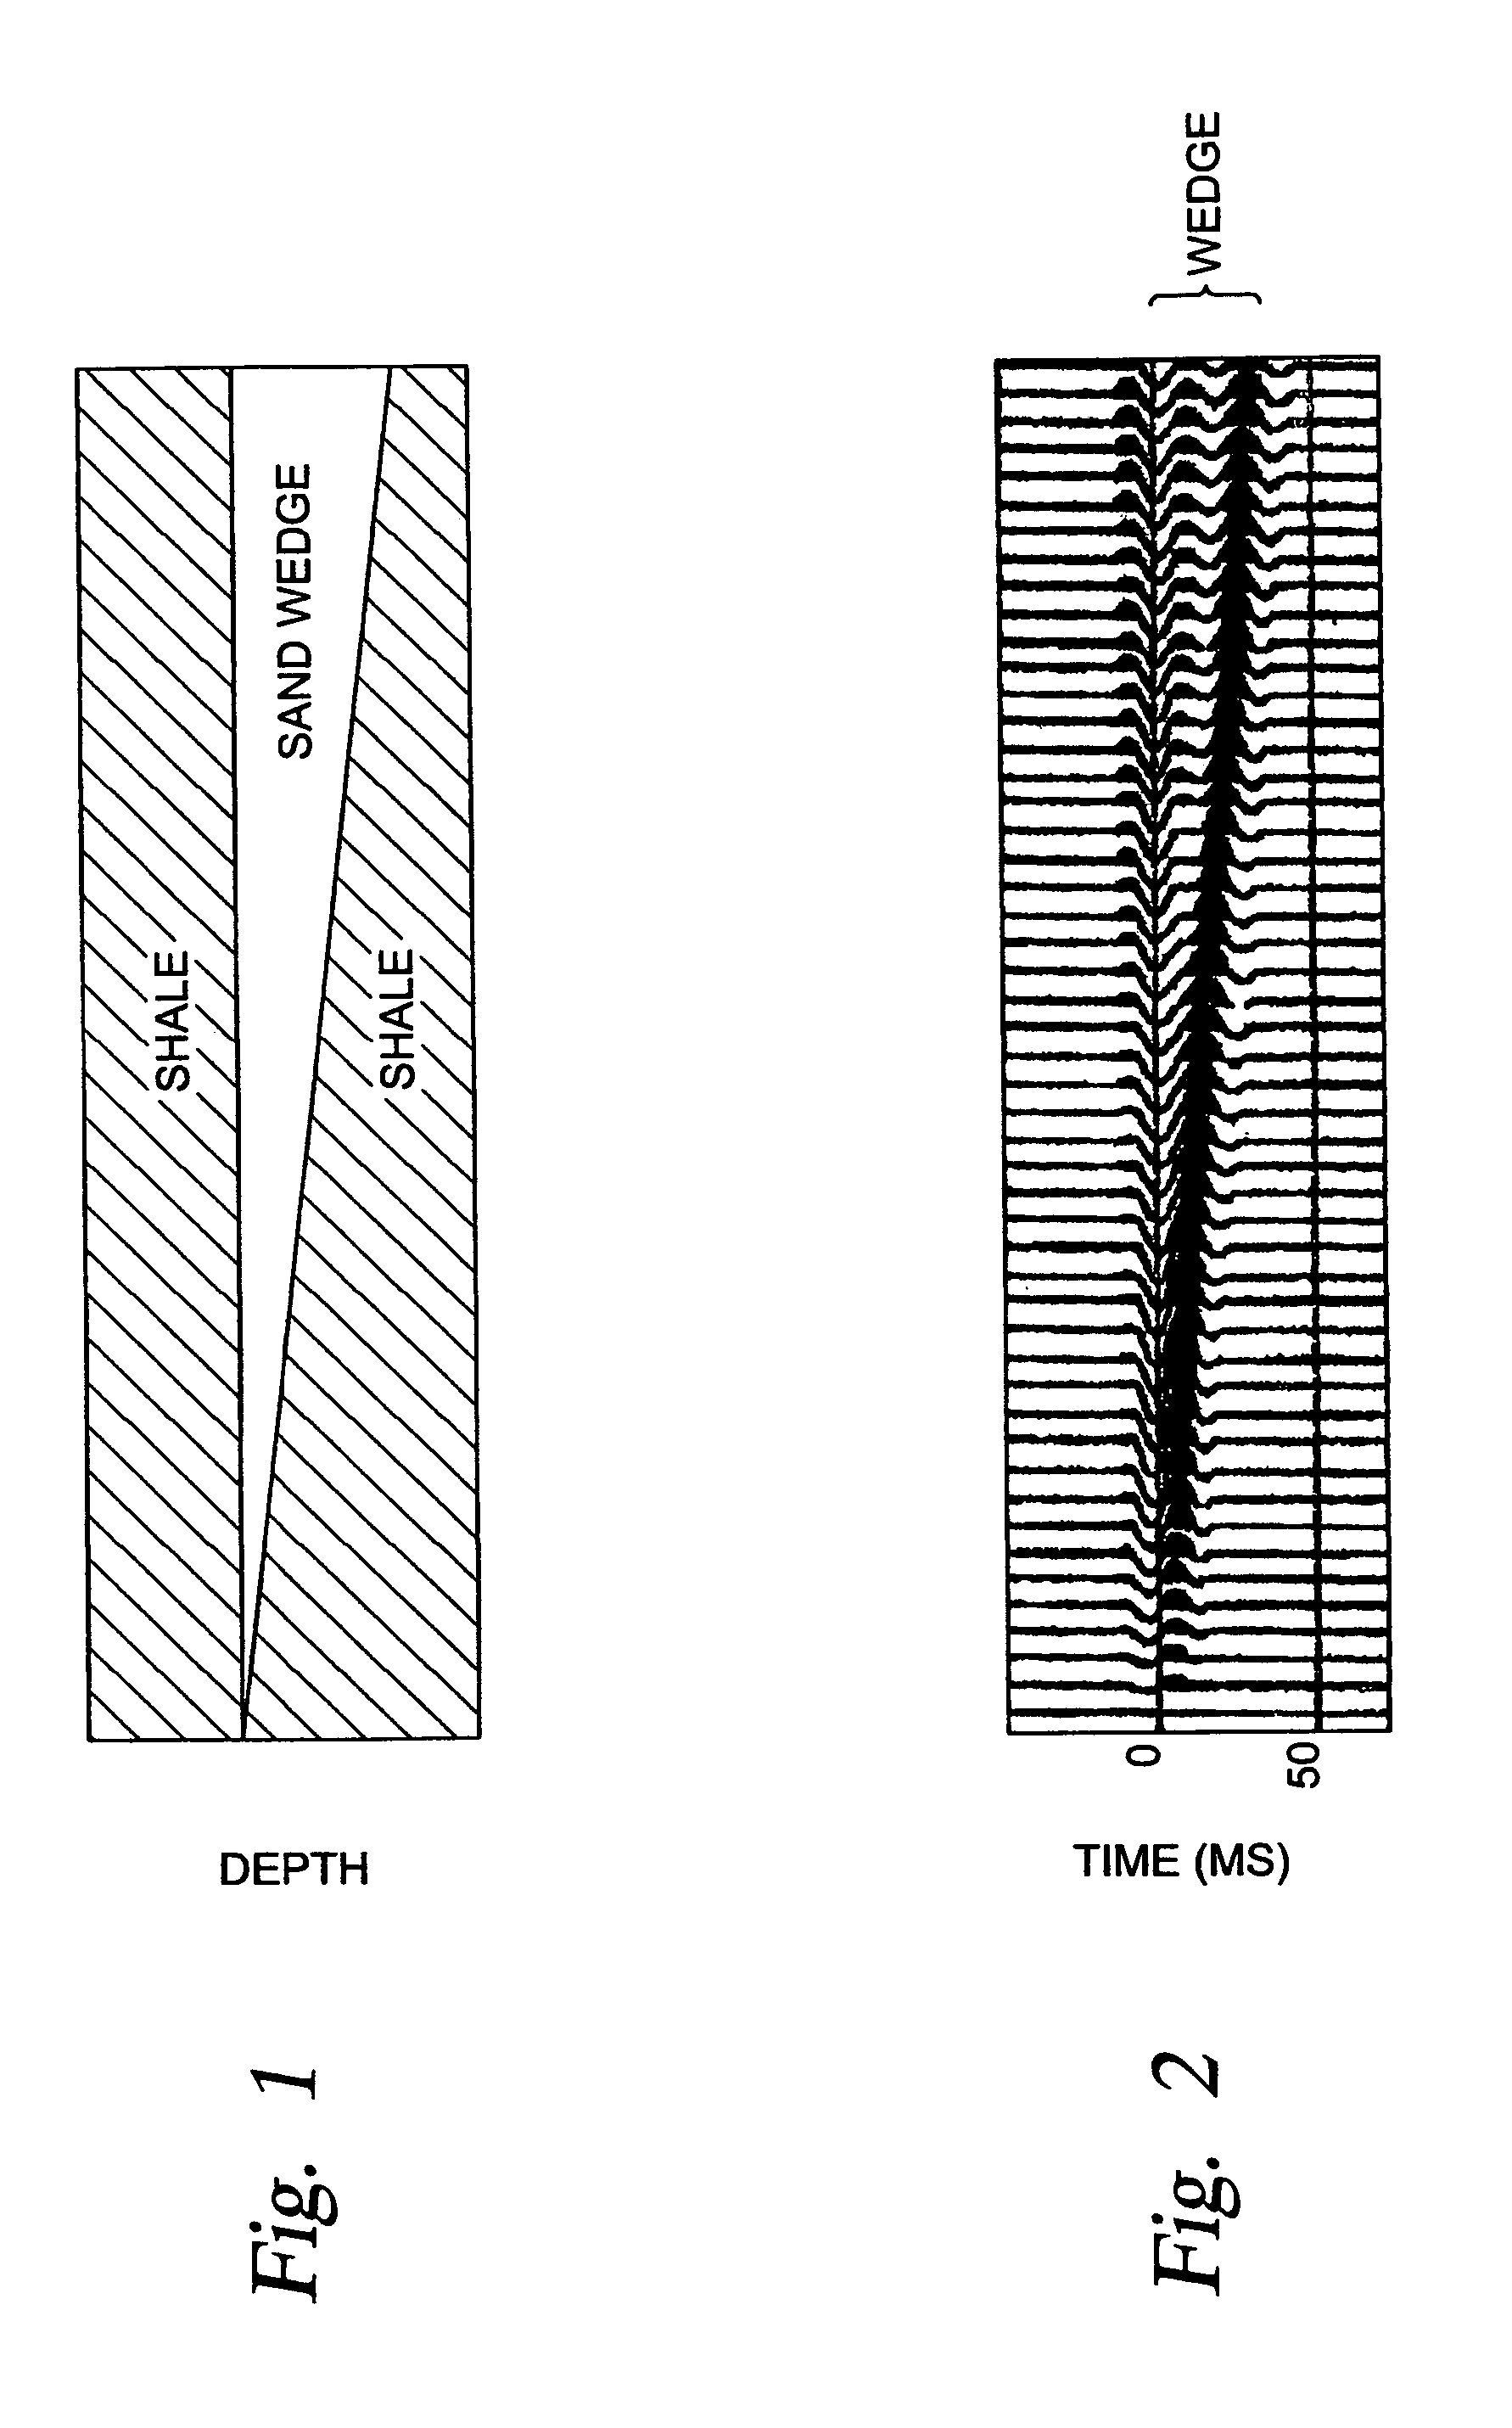 System for estimating thickness of thin subsurface strata